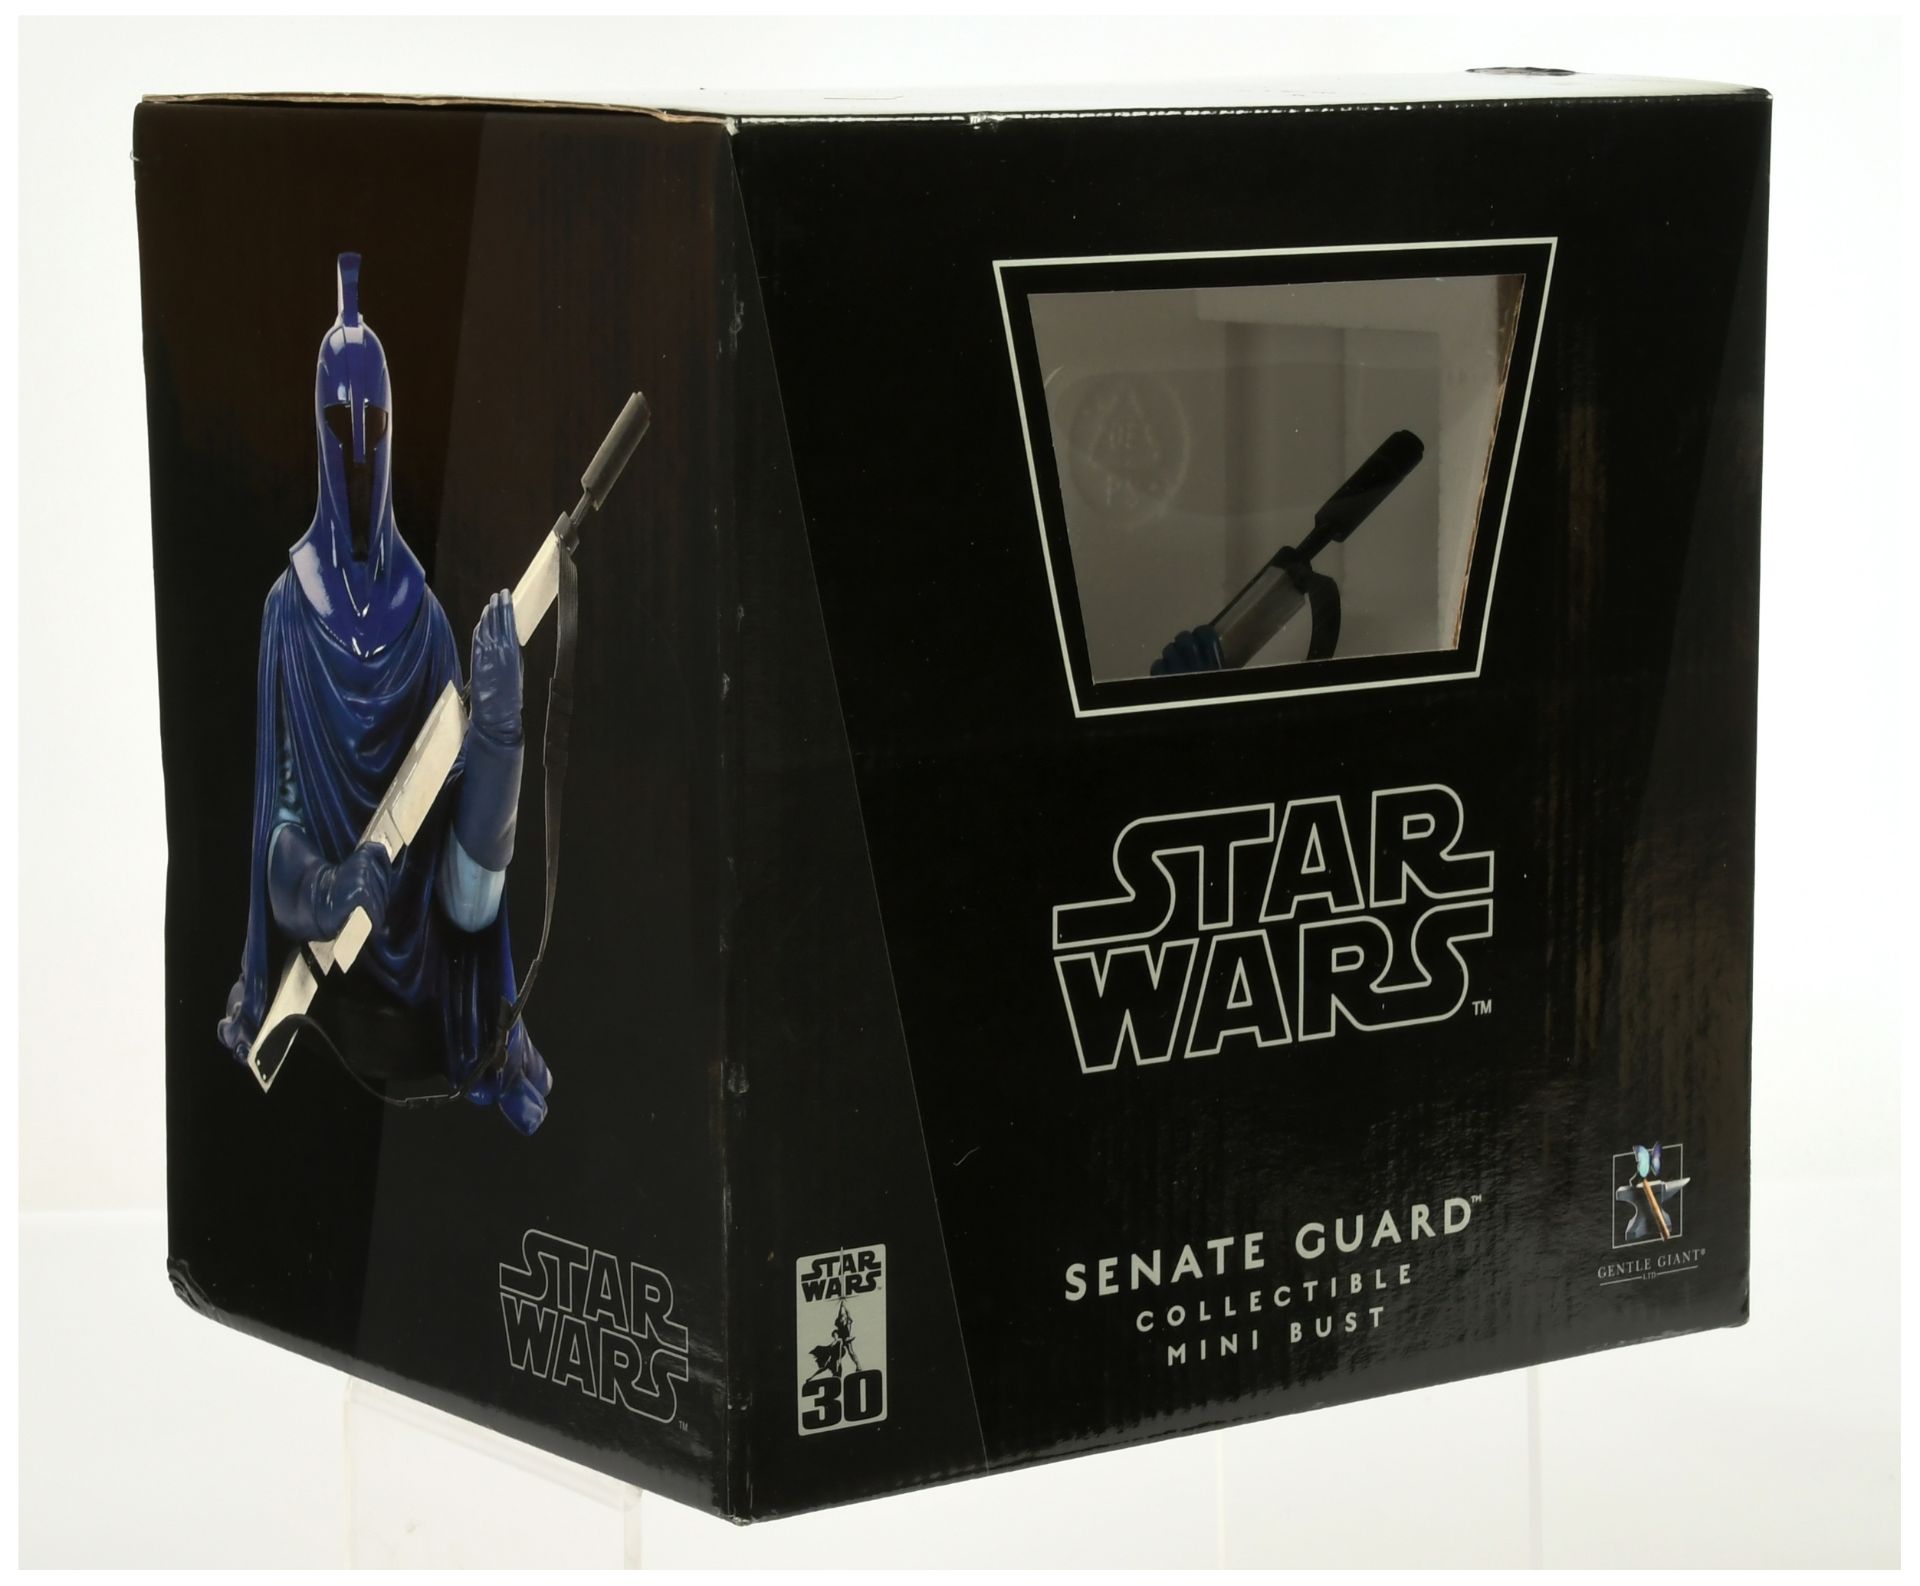 Gentle Giant Star Wars Senate Guard collectable mini bust